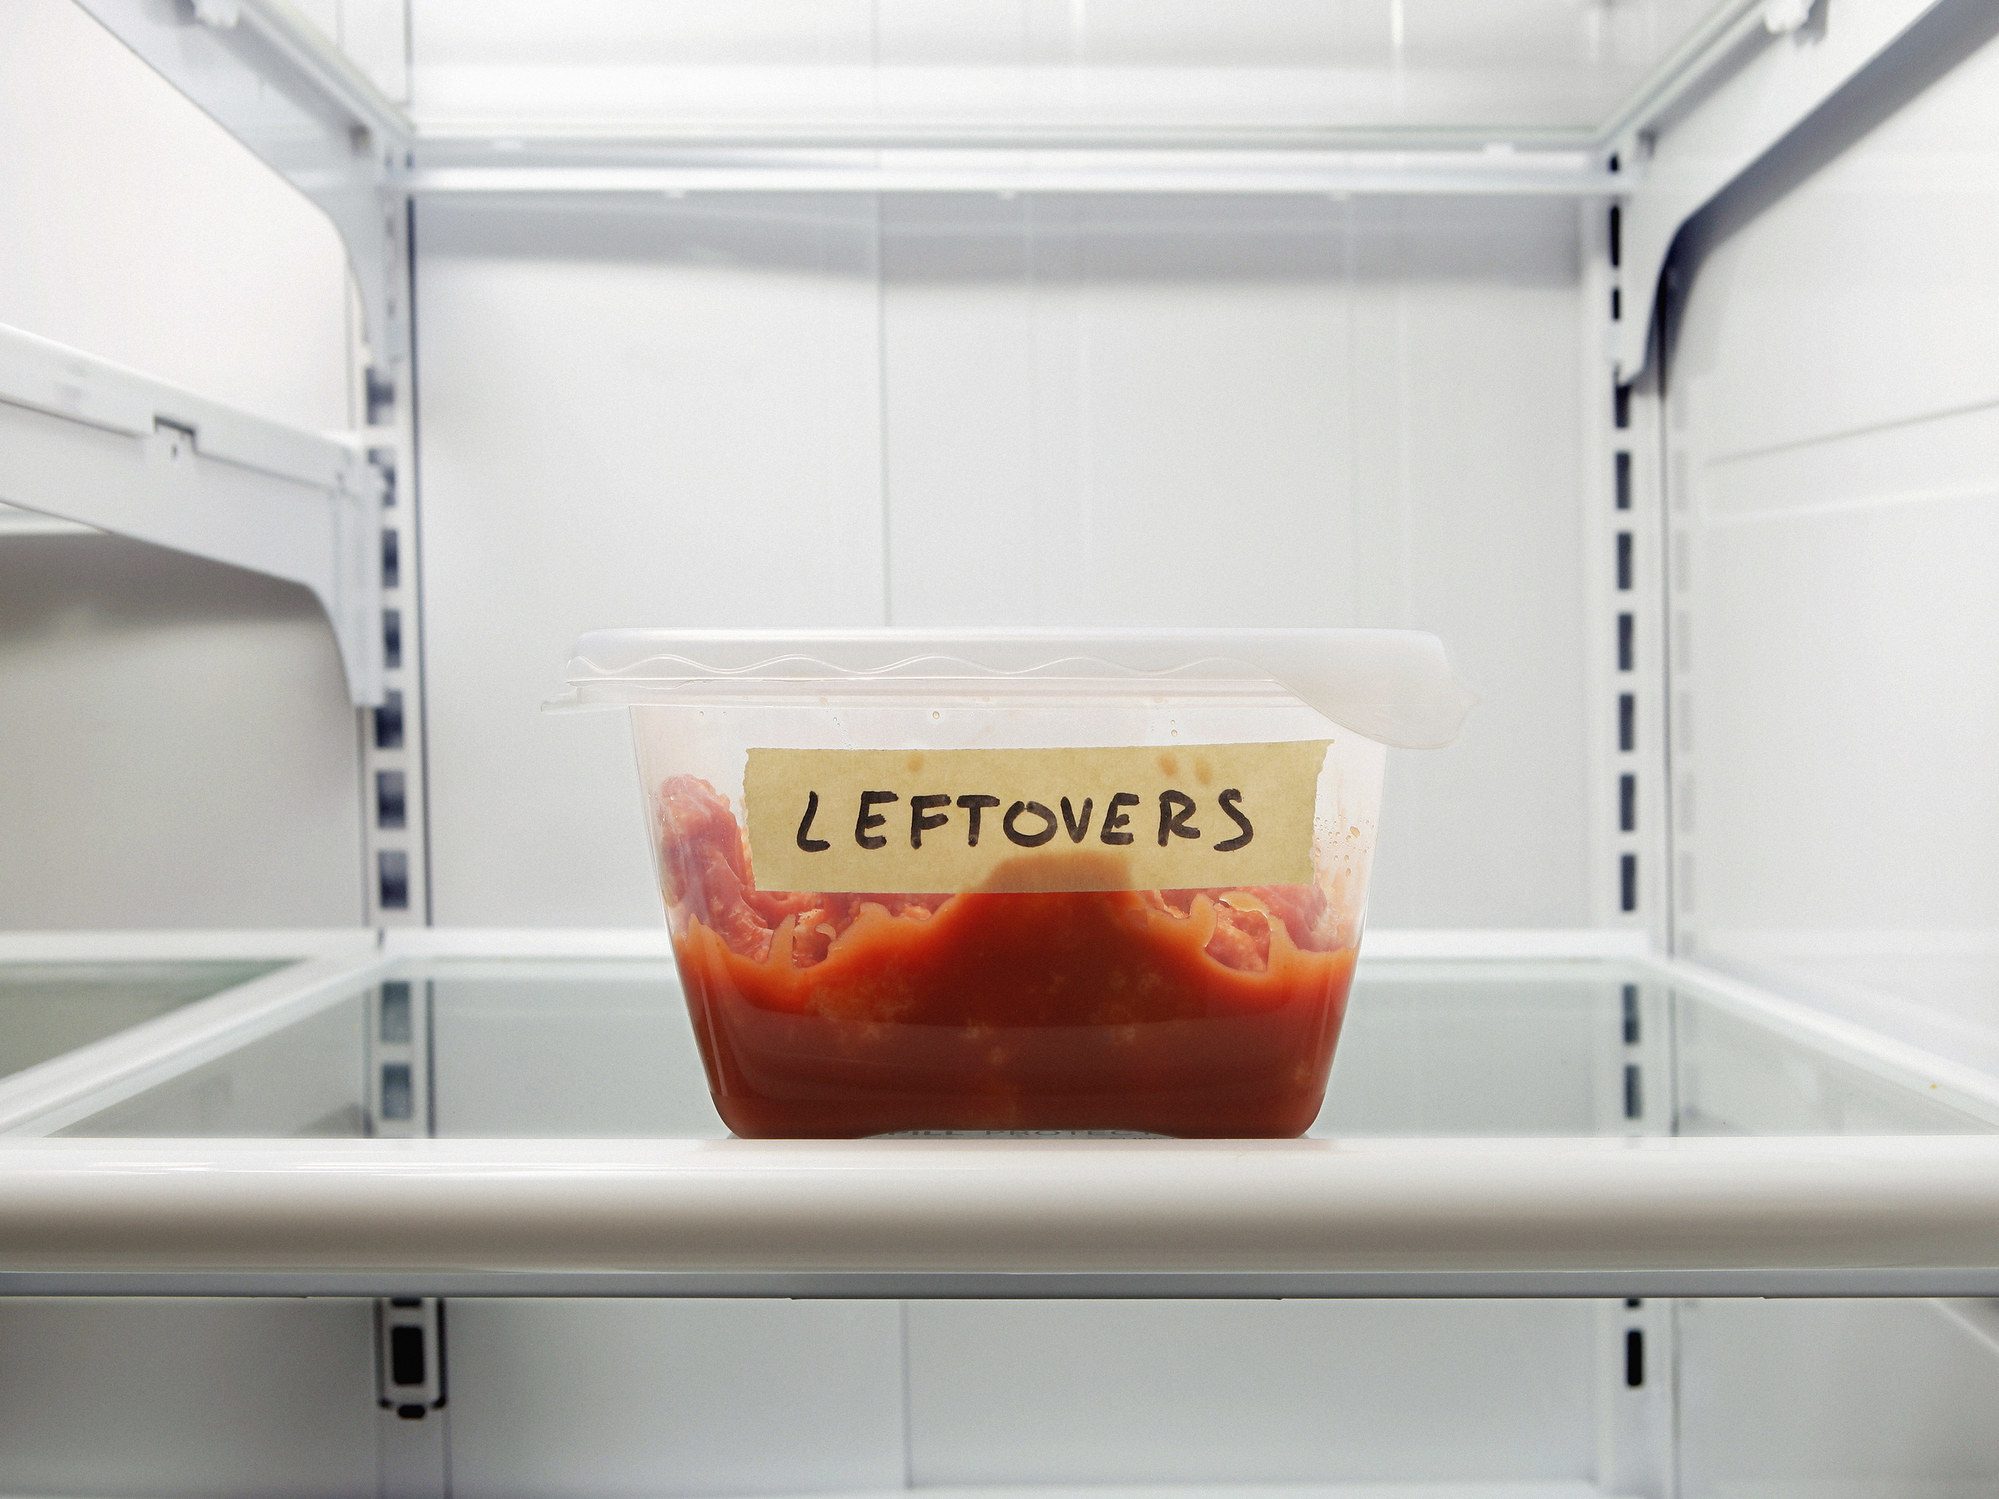 a container of leftovers